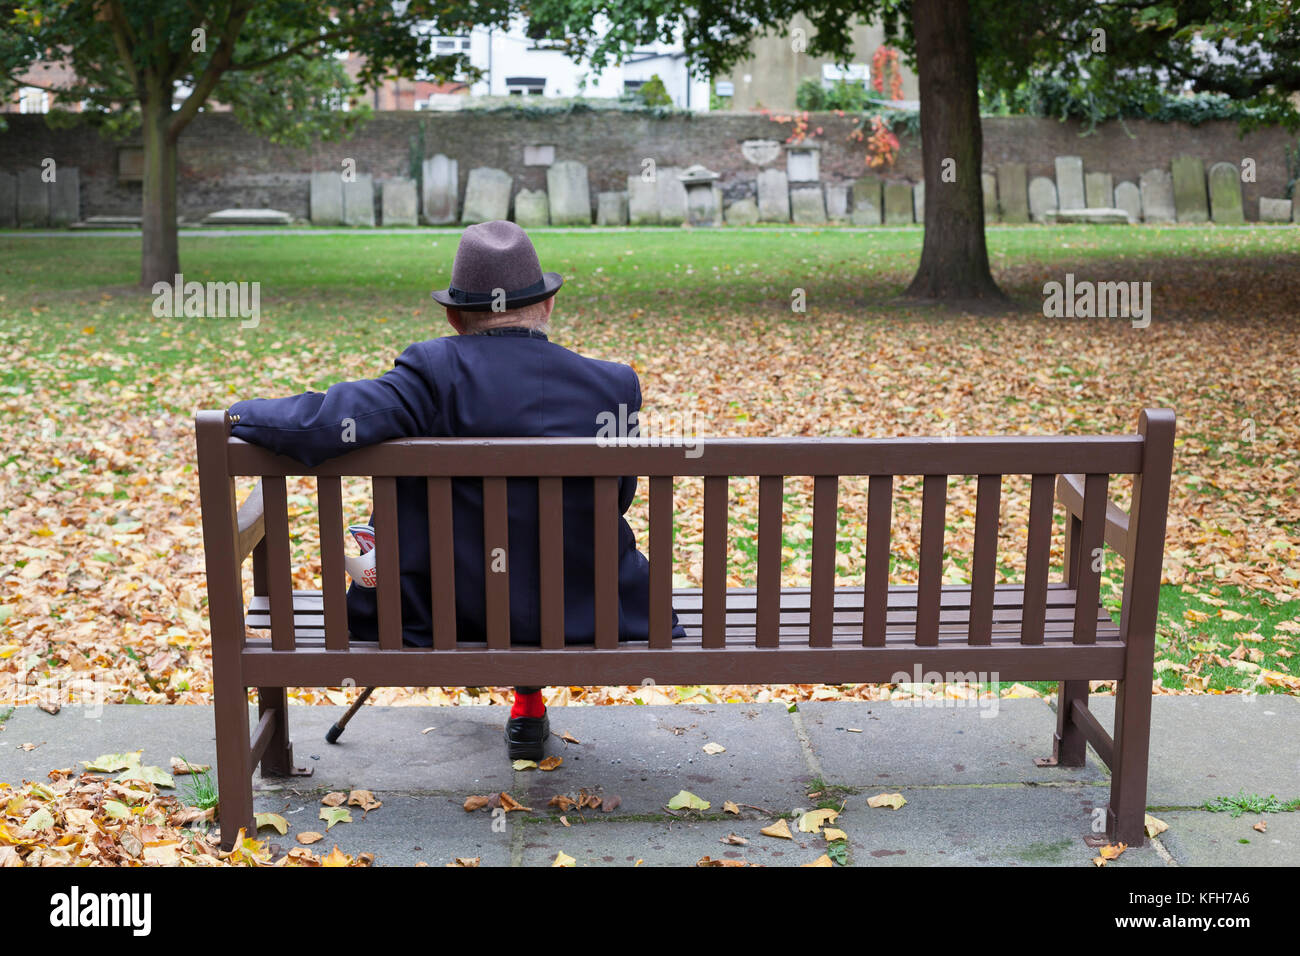 Old man sitting on bench in grounds of St George's Deal church with gravestones around perimeter, Deal, Kent, England, United Kingdom, Europe Stock Photo